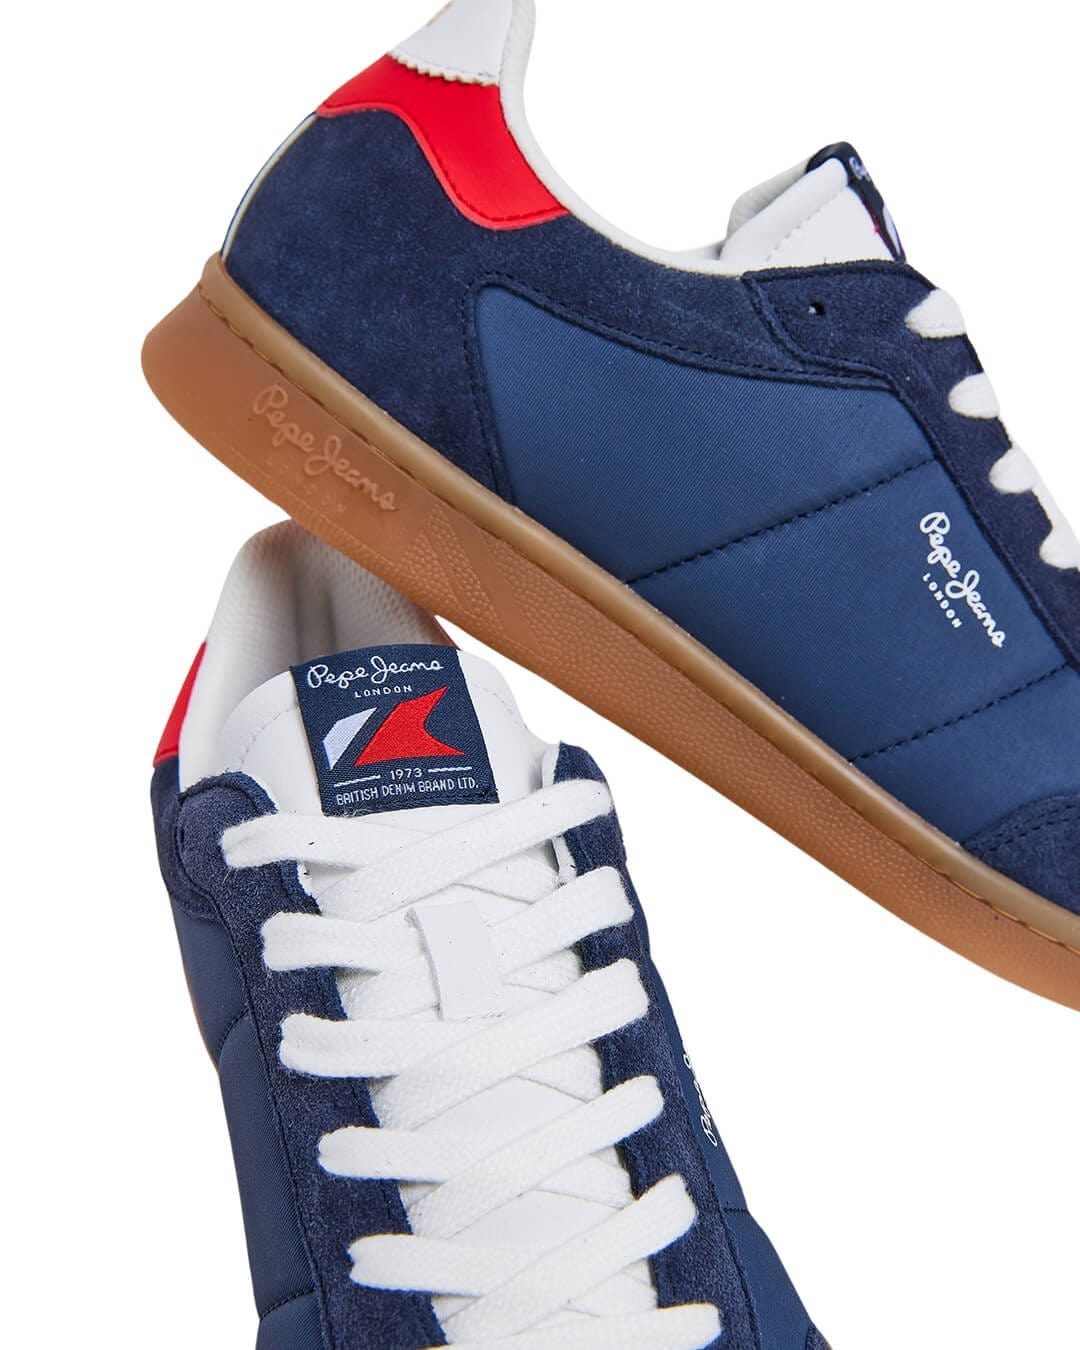 Pepe Jeans Shoes Pepe Jeans Navy Combined Classic Trainers